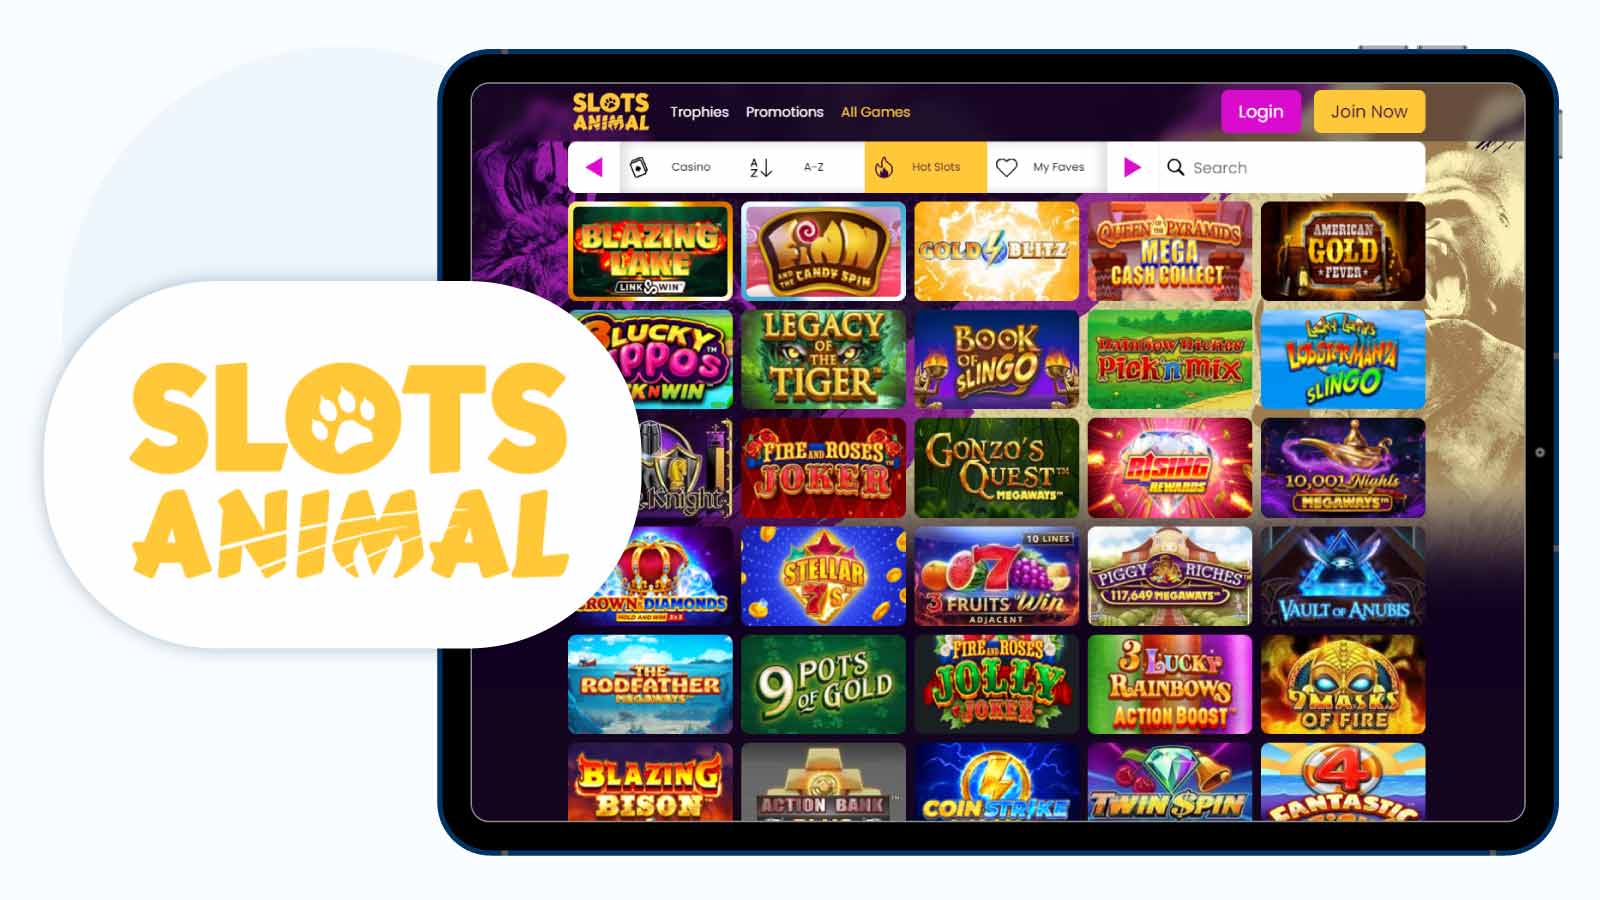 Free Spins on Wolf Gold at Slots Animal Casino